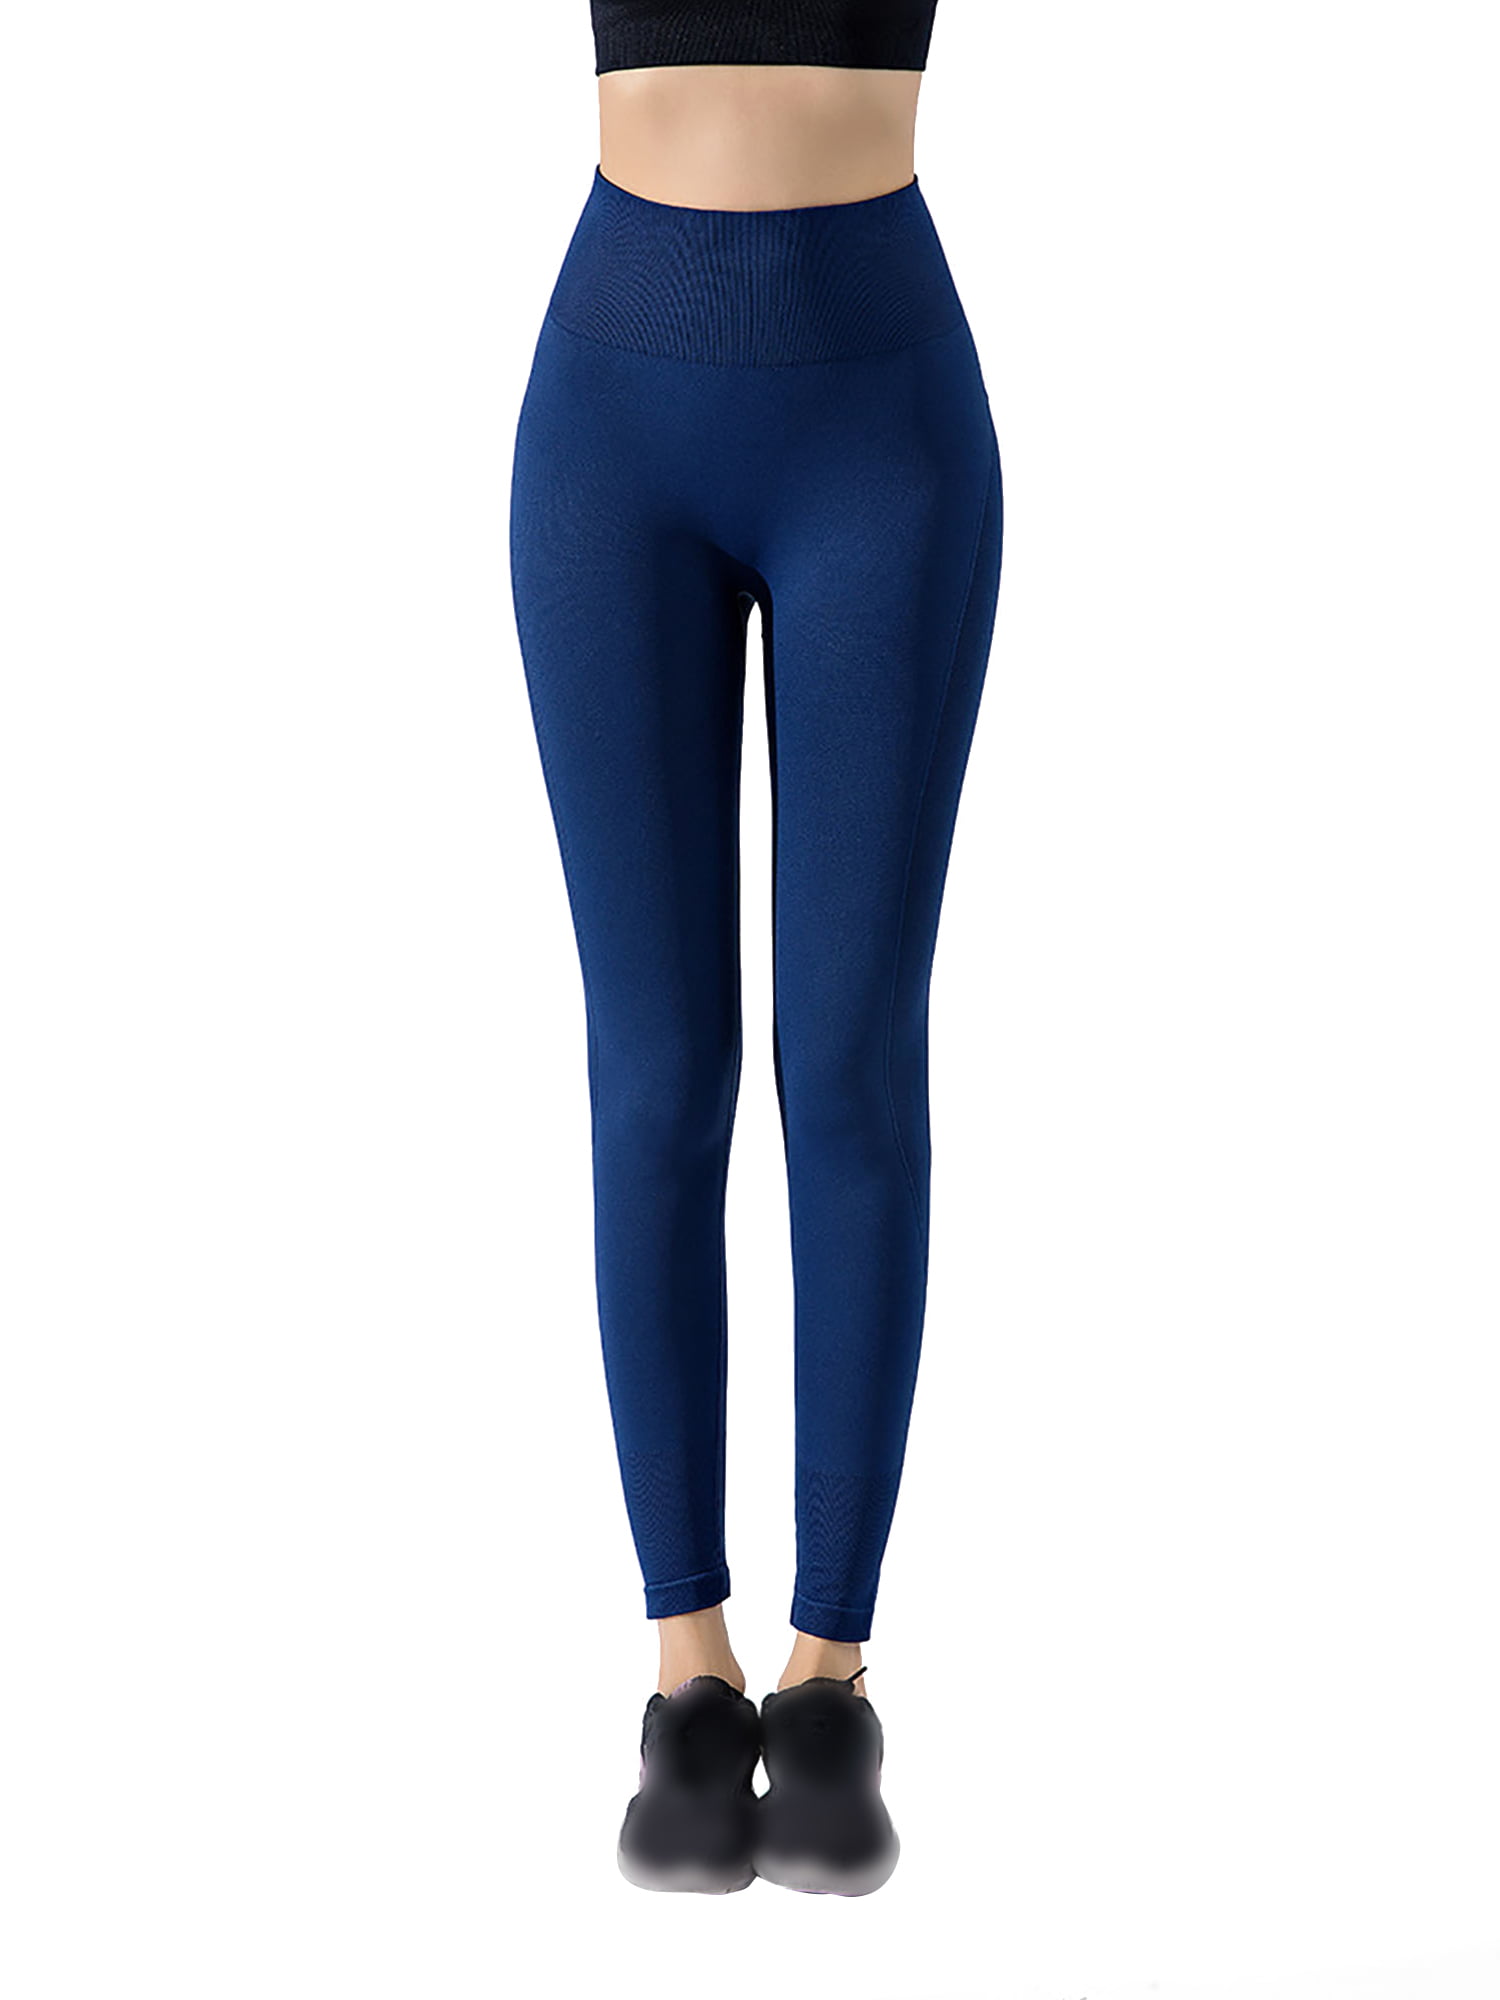 Simple Navy Blue Workout Leggings for Fat Body